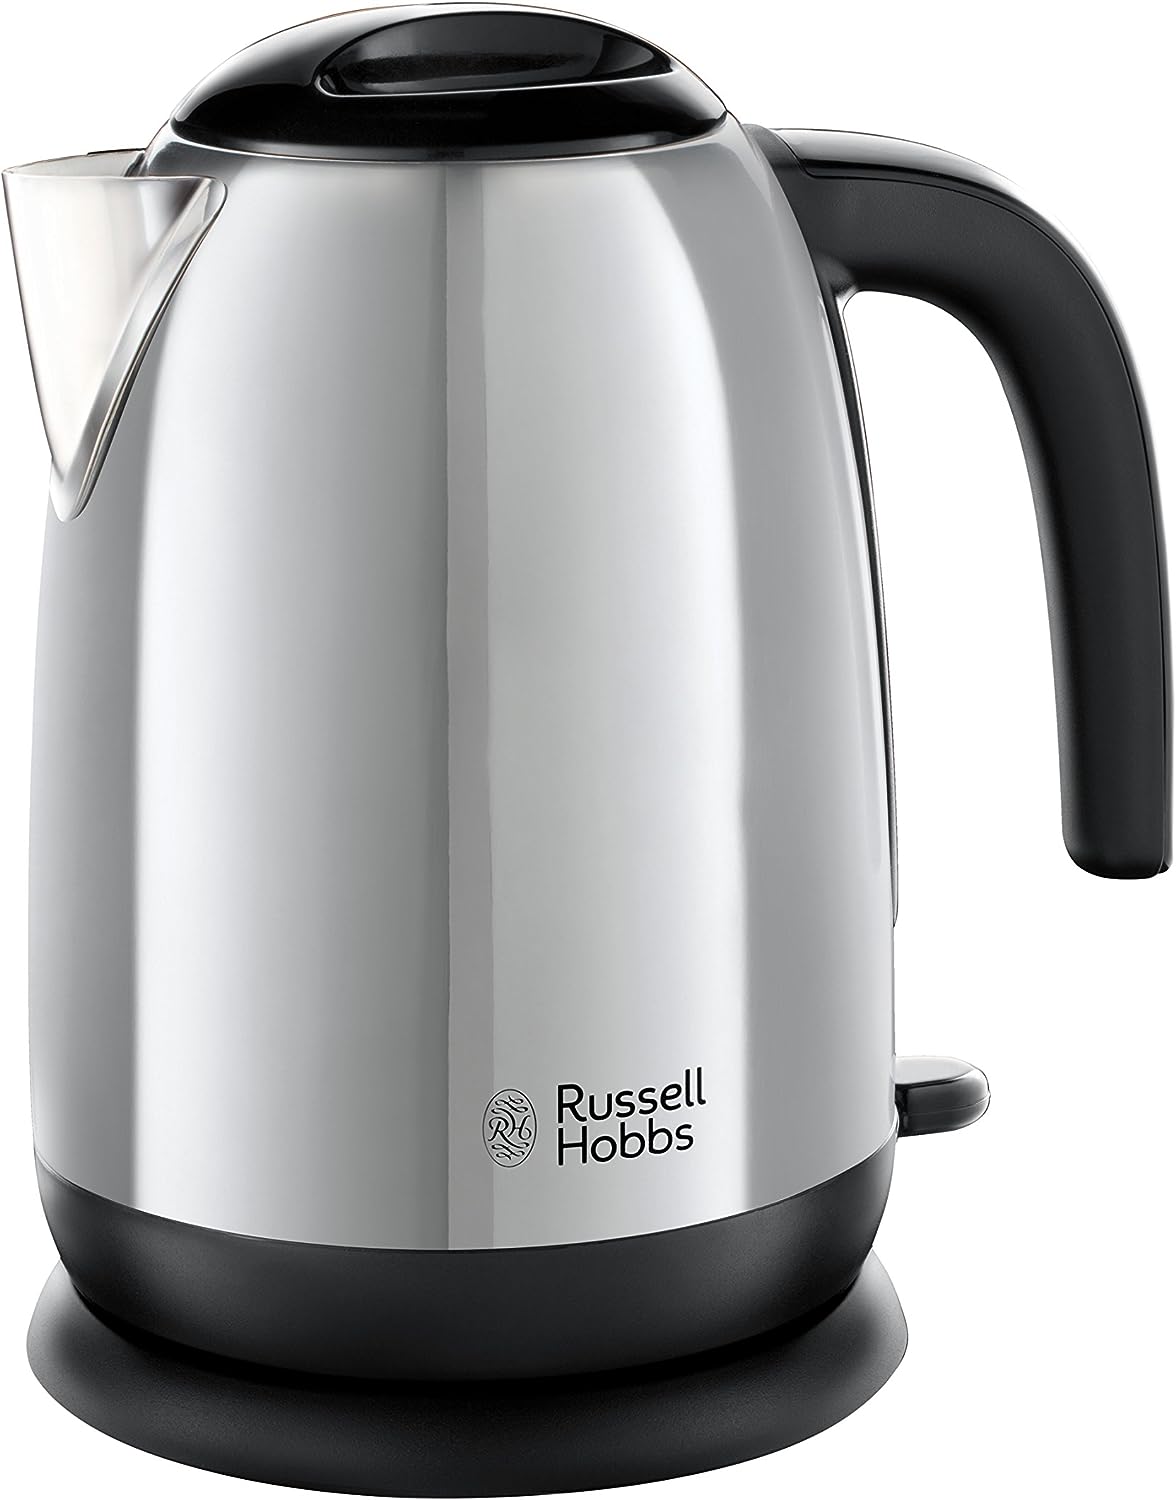 Russell Hobbs 20070 Cambridge Kettle, 1.7 L Kettle, Glossy 1.7 L, Polished